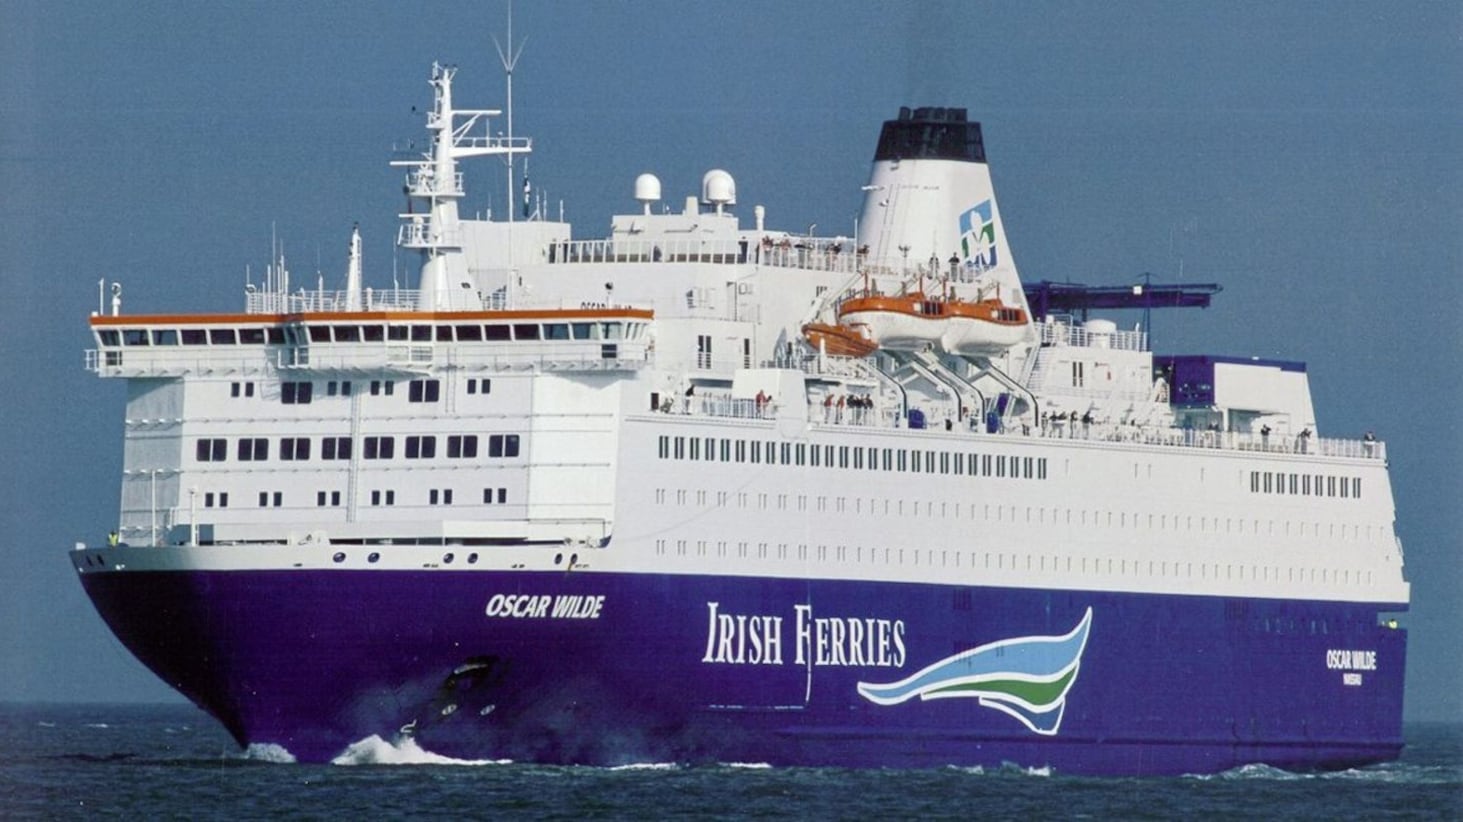 Fourteen people were discovered by Garda Immigration Officers after the Oscar Wilde ferry docked 